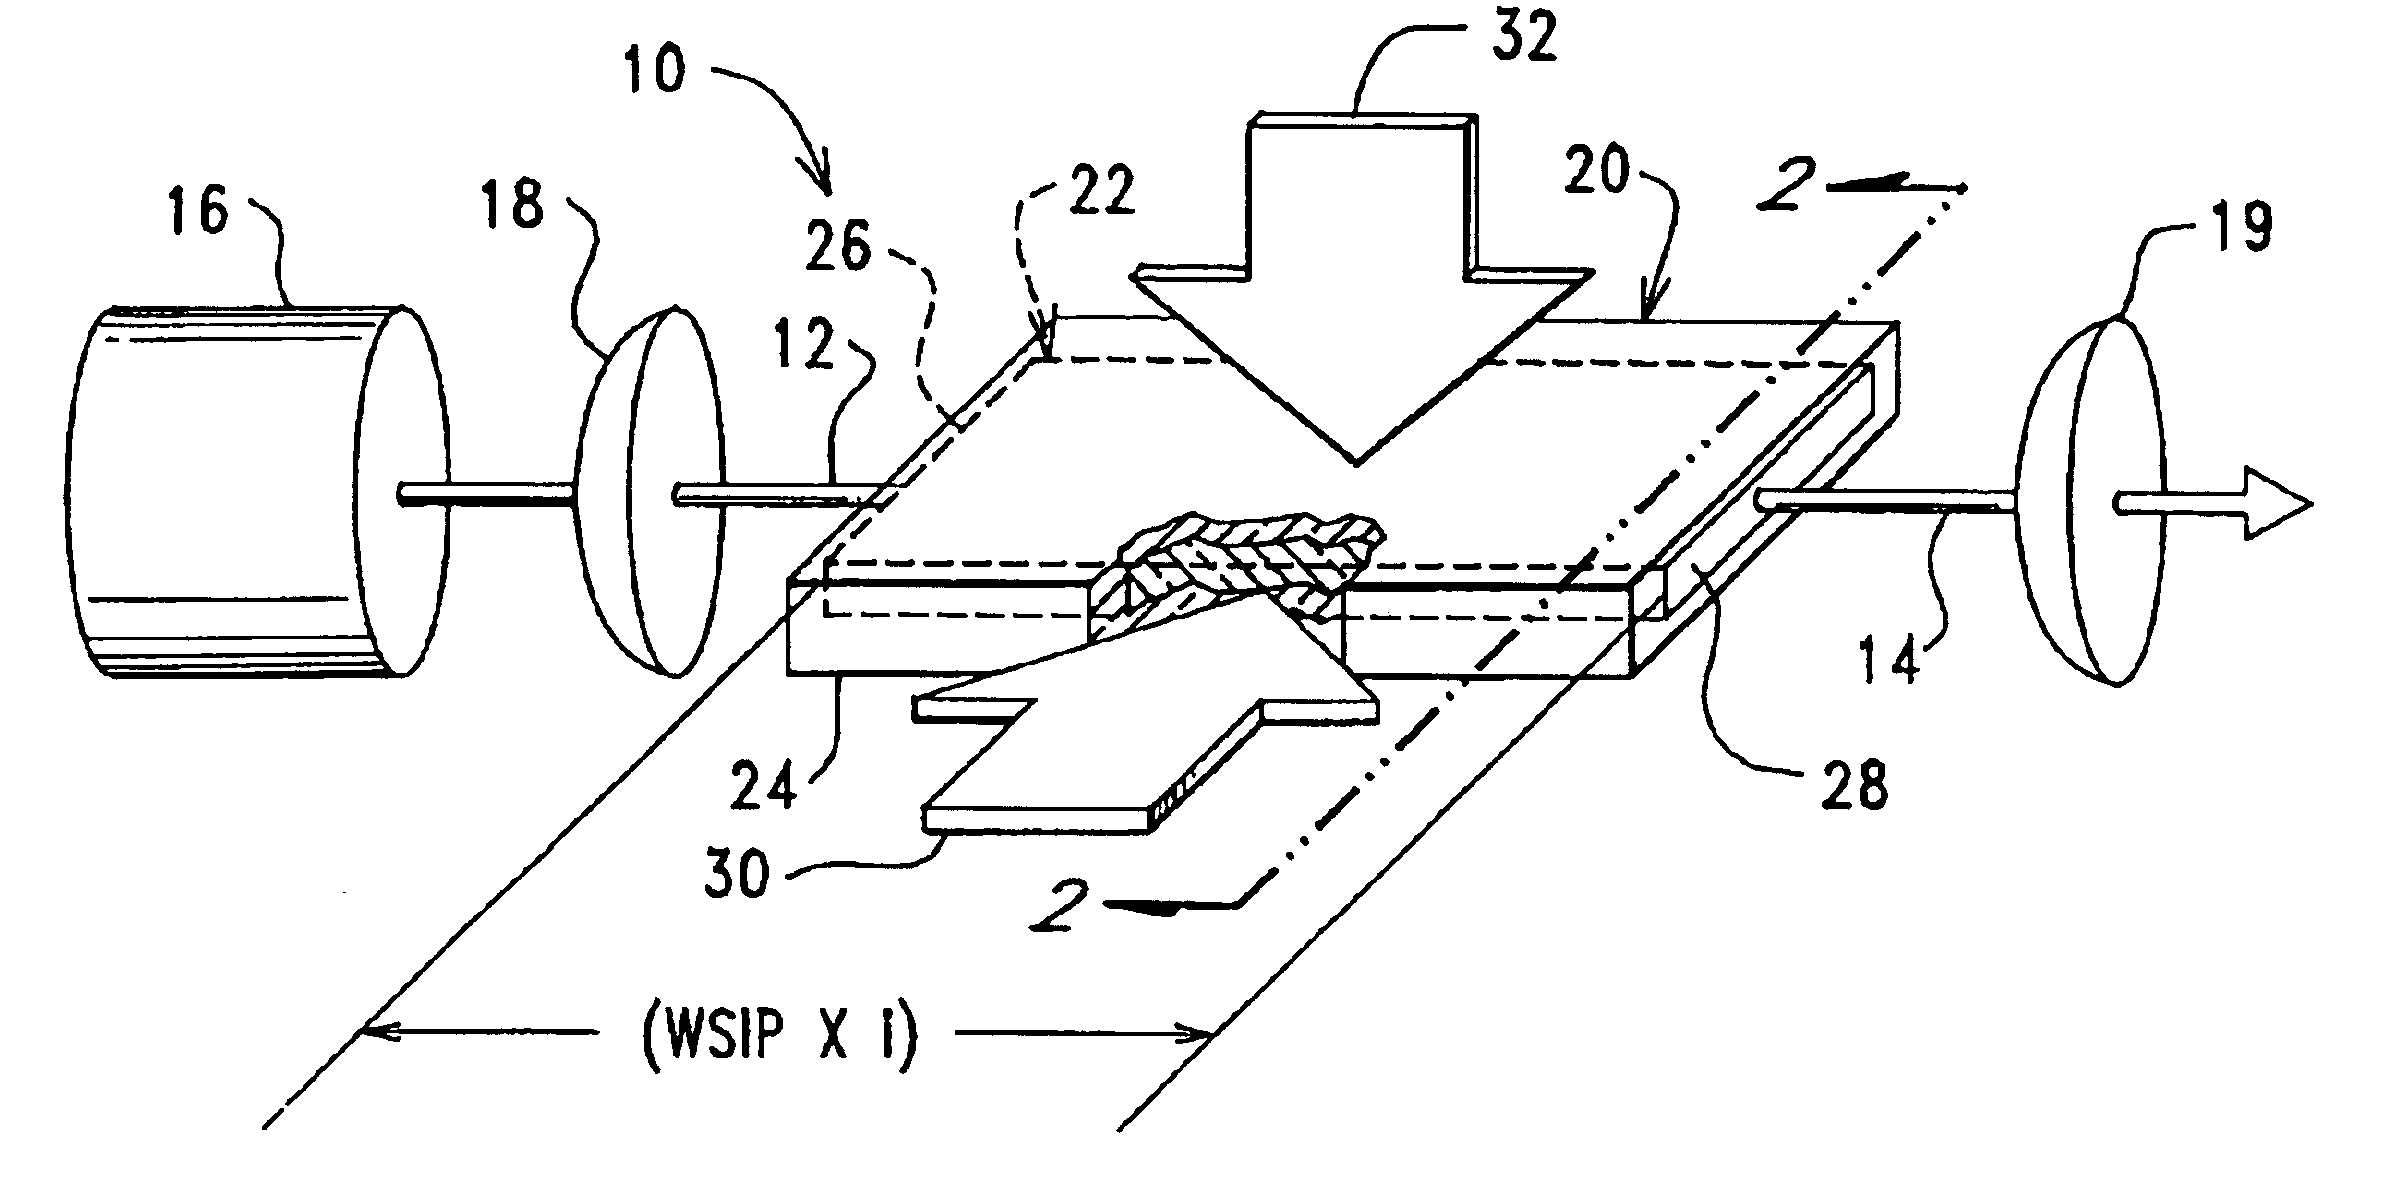 Power scalable waveguide amplifier and laser devices